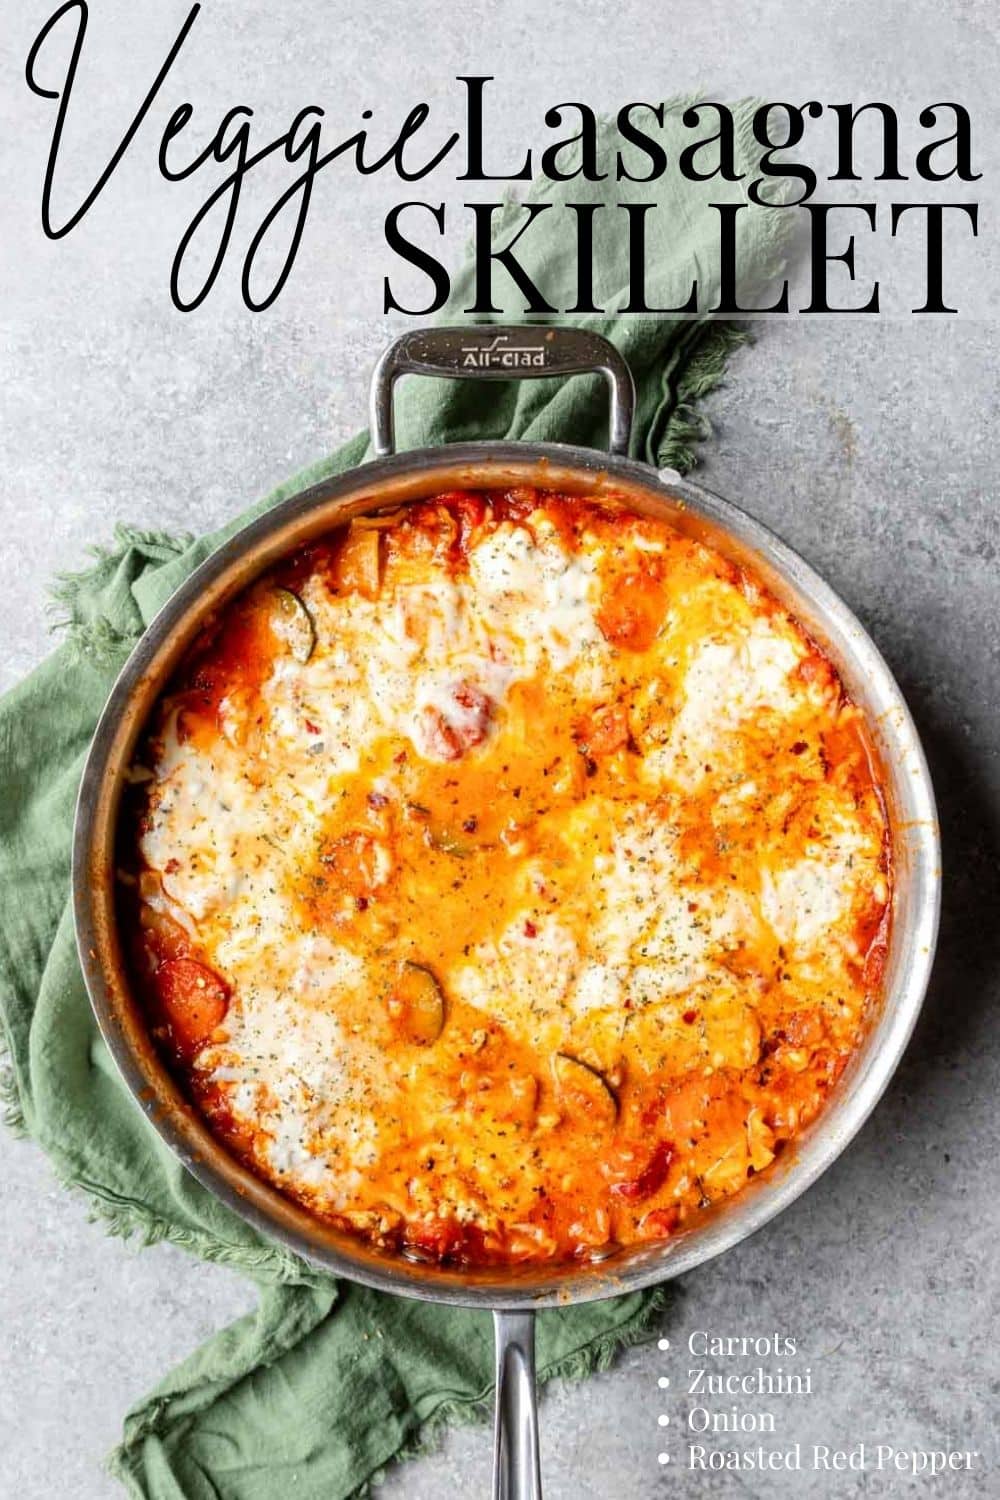 veggie lasagna skillet pin image with text overlay